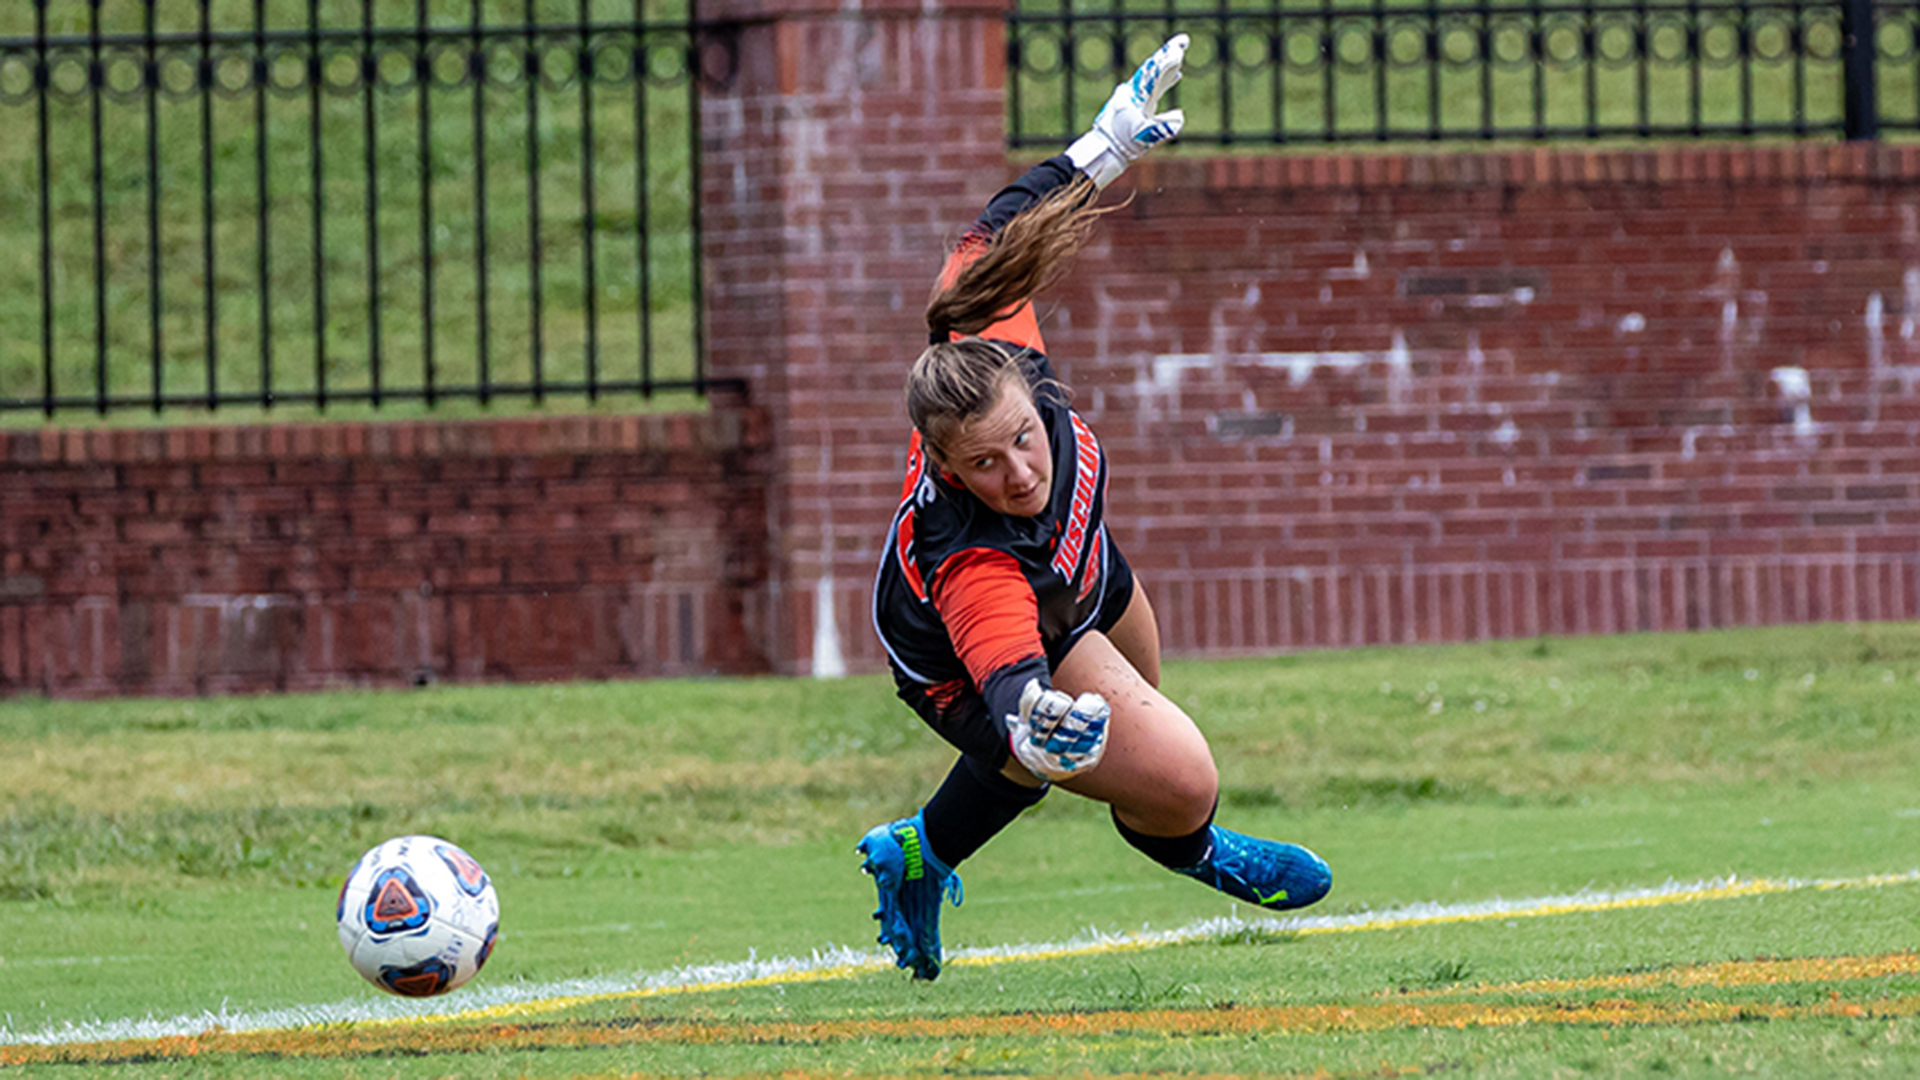 Emma Harriman got a glove on this shot for one of her five saves against Mars Hill (photo by Chuck Williams)